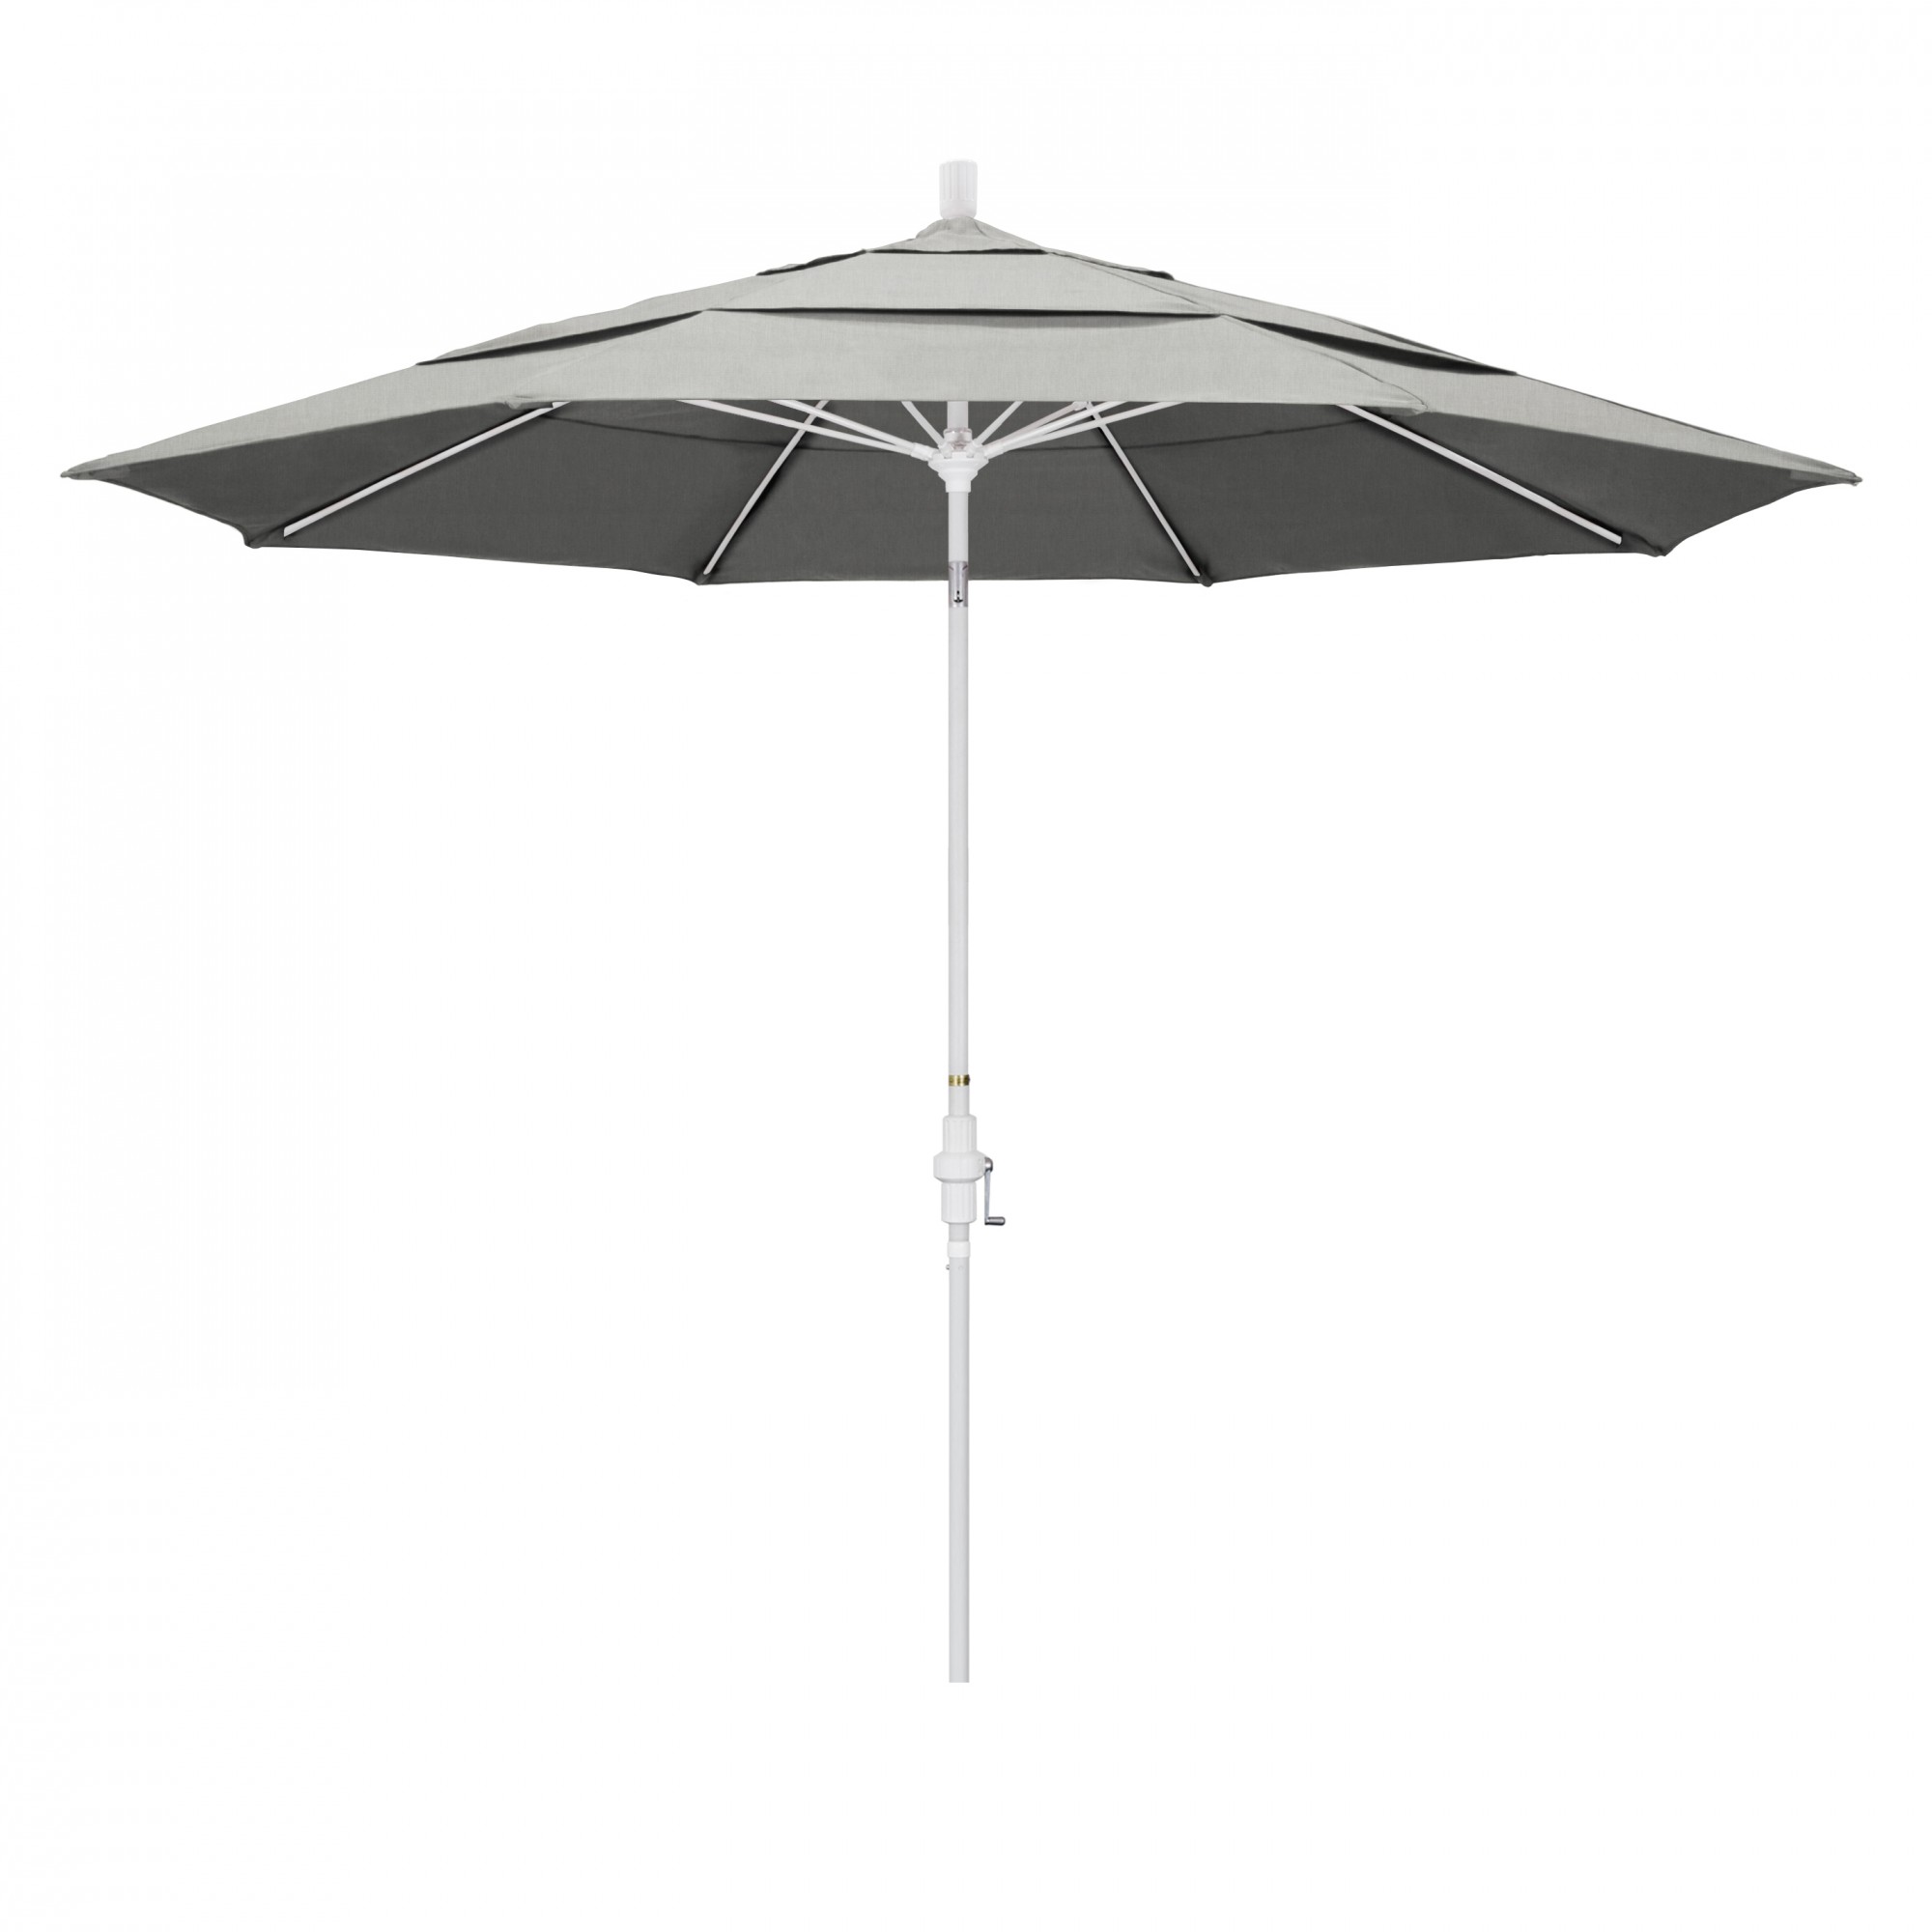 Outdoor Living and Style 11ft Outdoor Sun Master Series Patio Umbrella With Crank Lift and Collar-Tilt System, Granite Gray